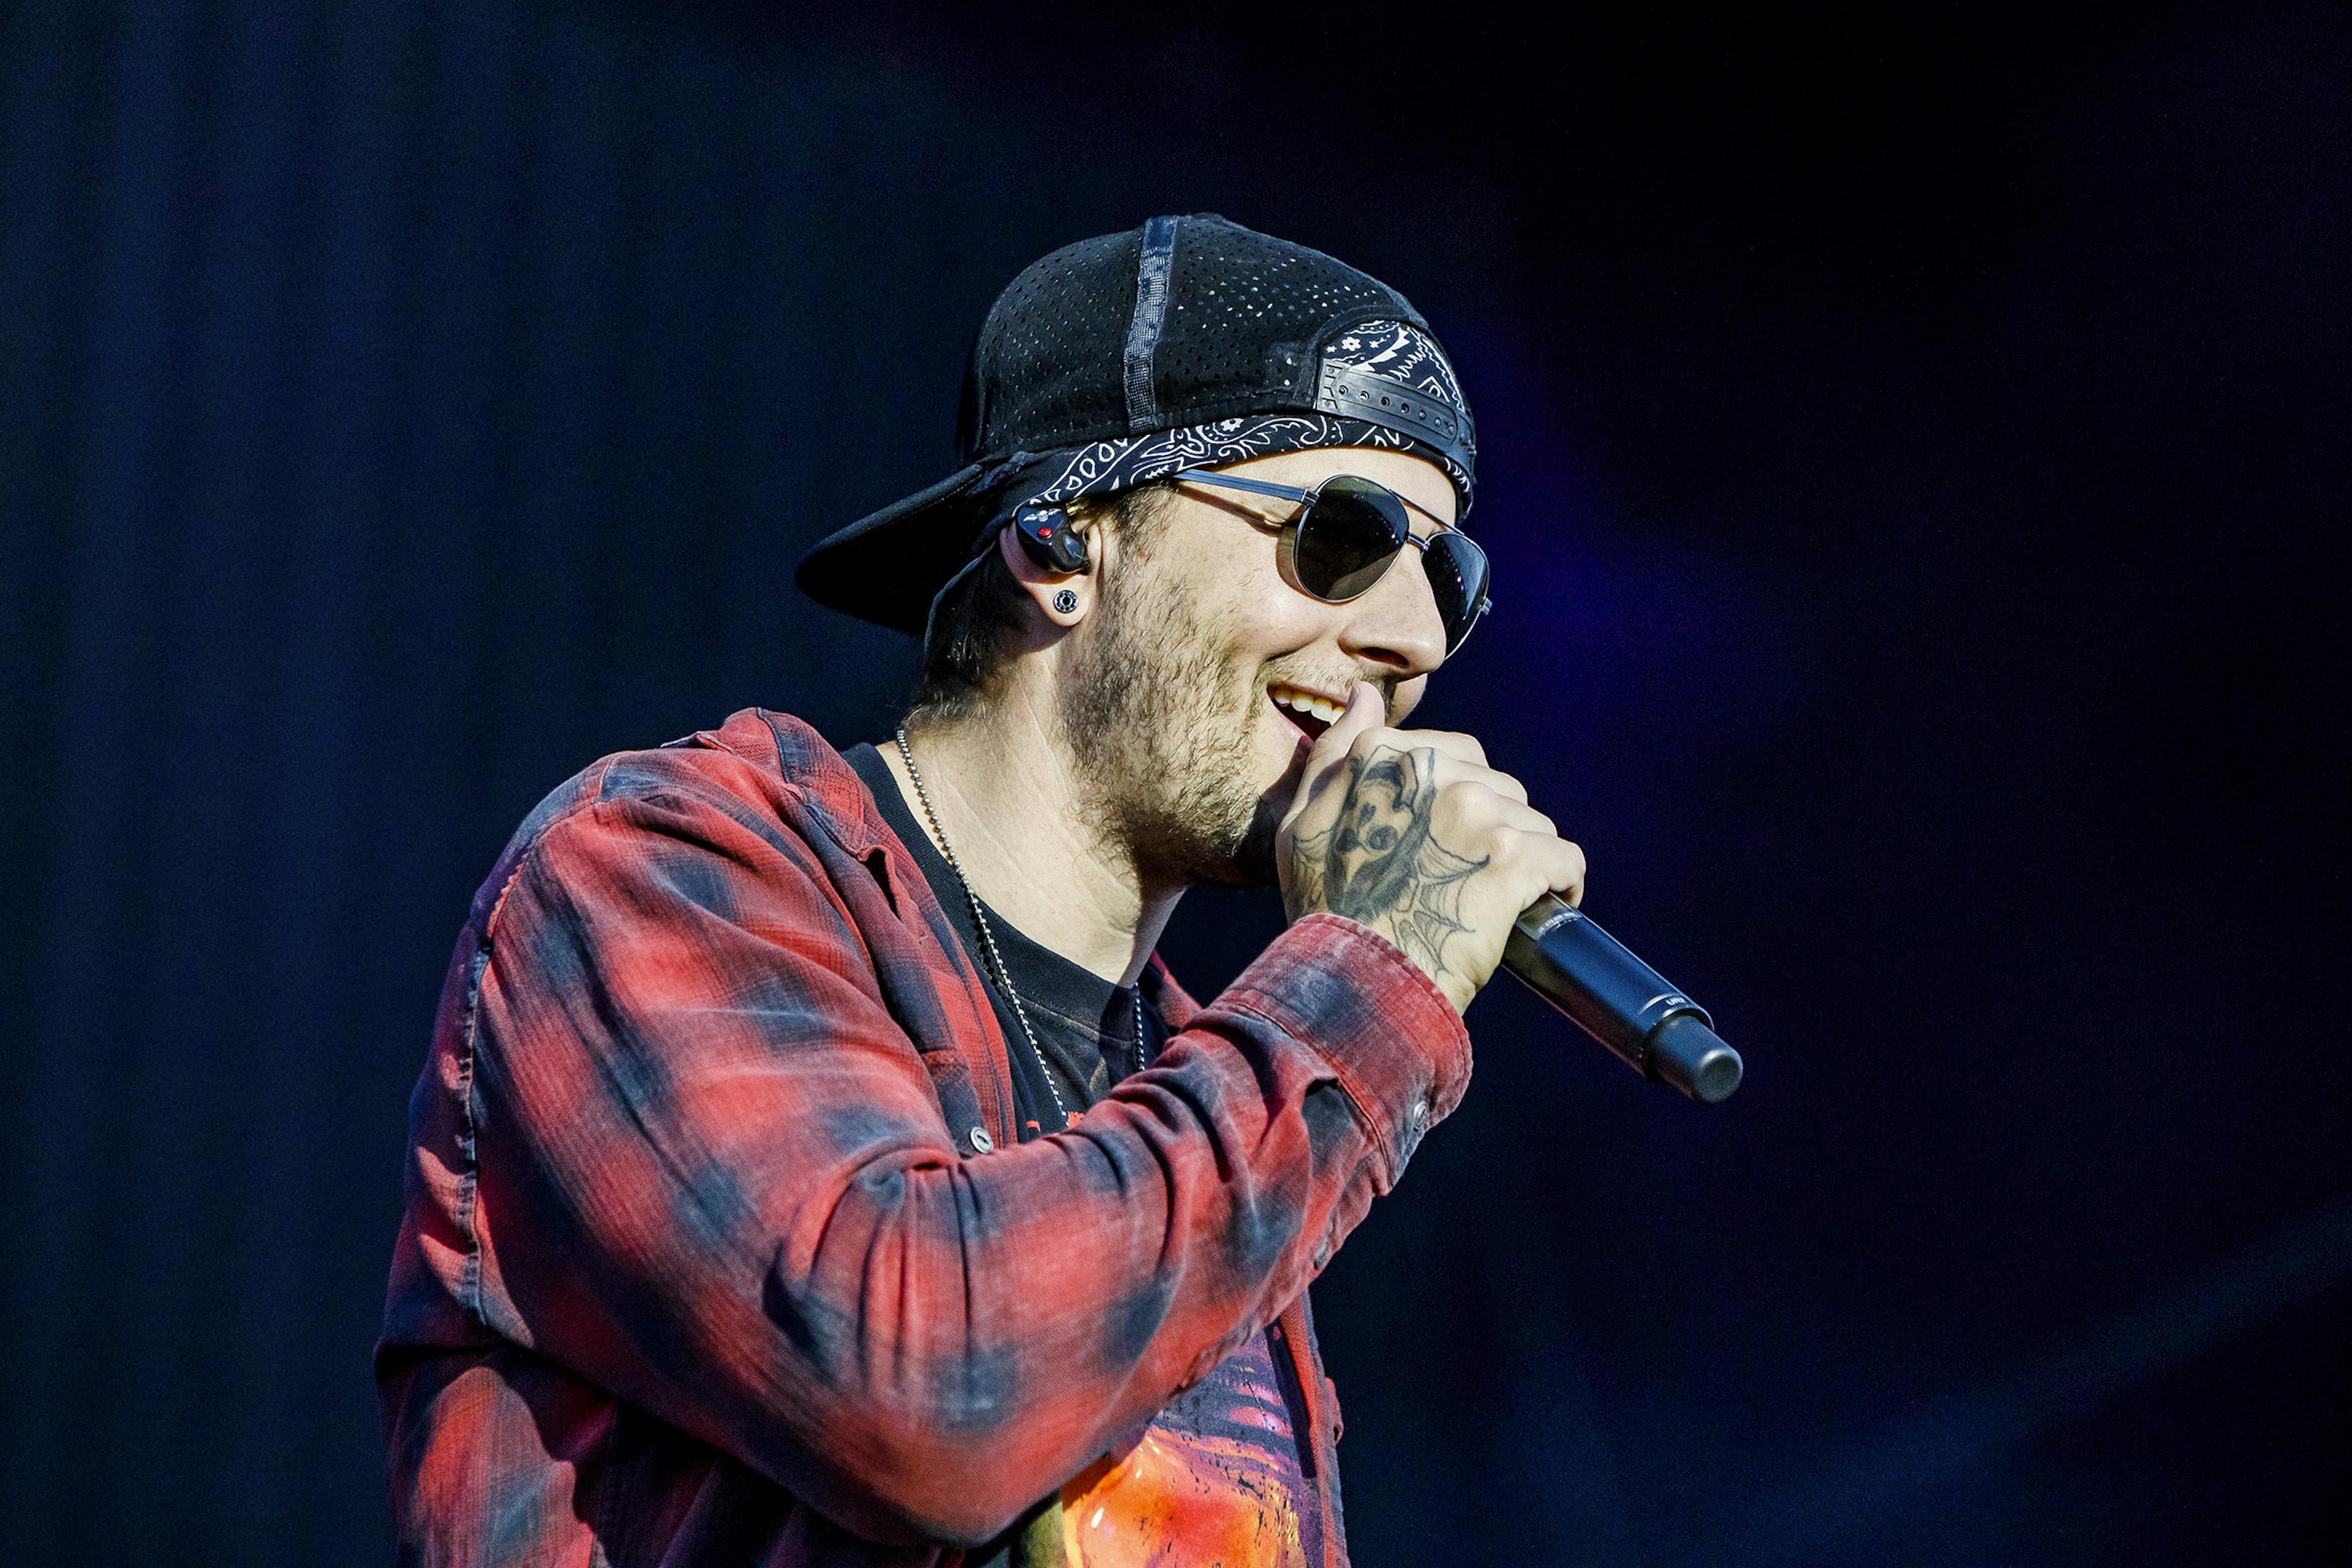 Avenged Sevenfold's M. Shadows On Why He Stands For Black Lives Matter